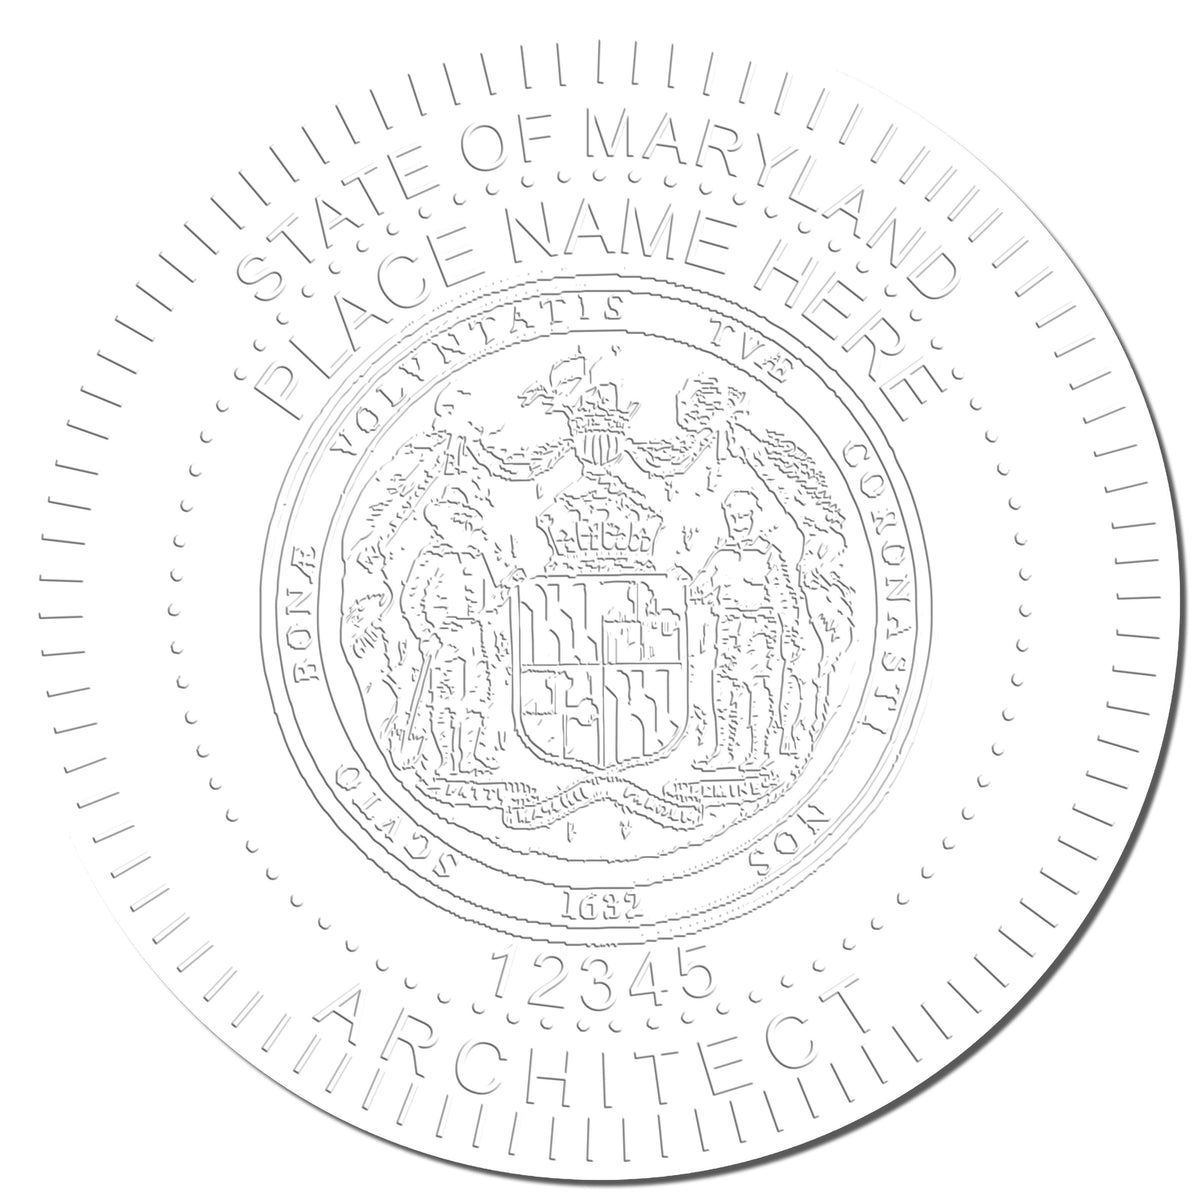 A stamped impression of the State of Maryland Long Reach Architectural Embossing Seal in this stylish lifestyle photo, setting the tone for a unique and personalized product.